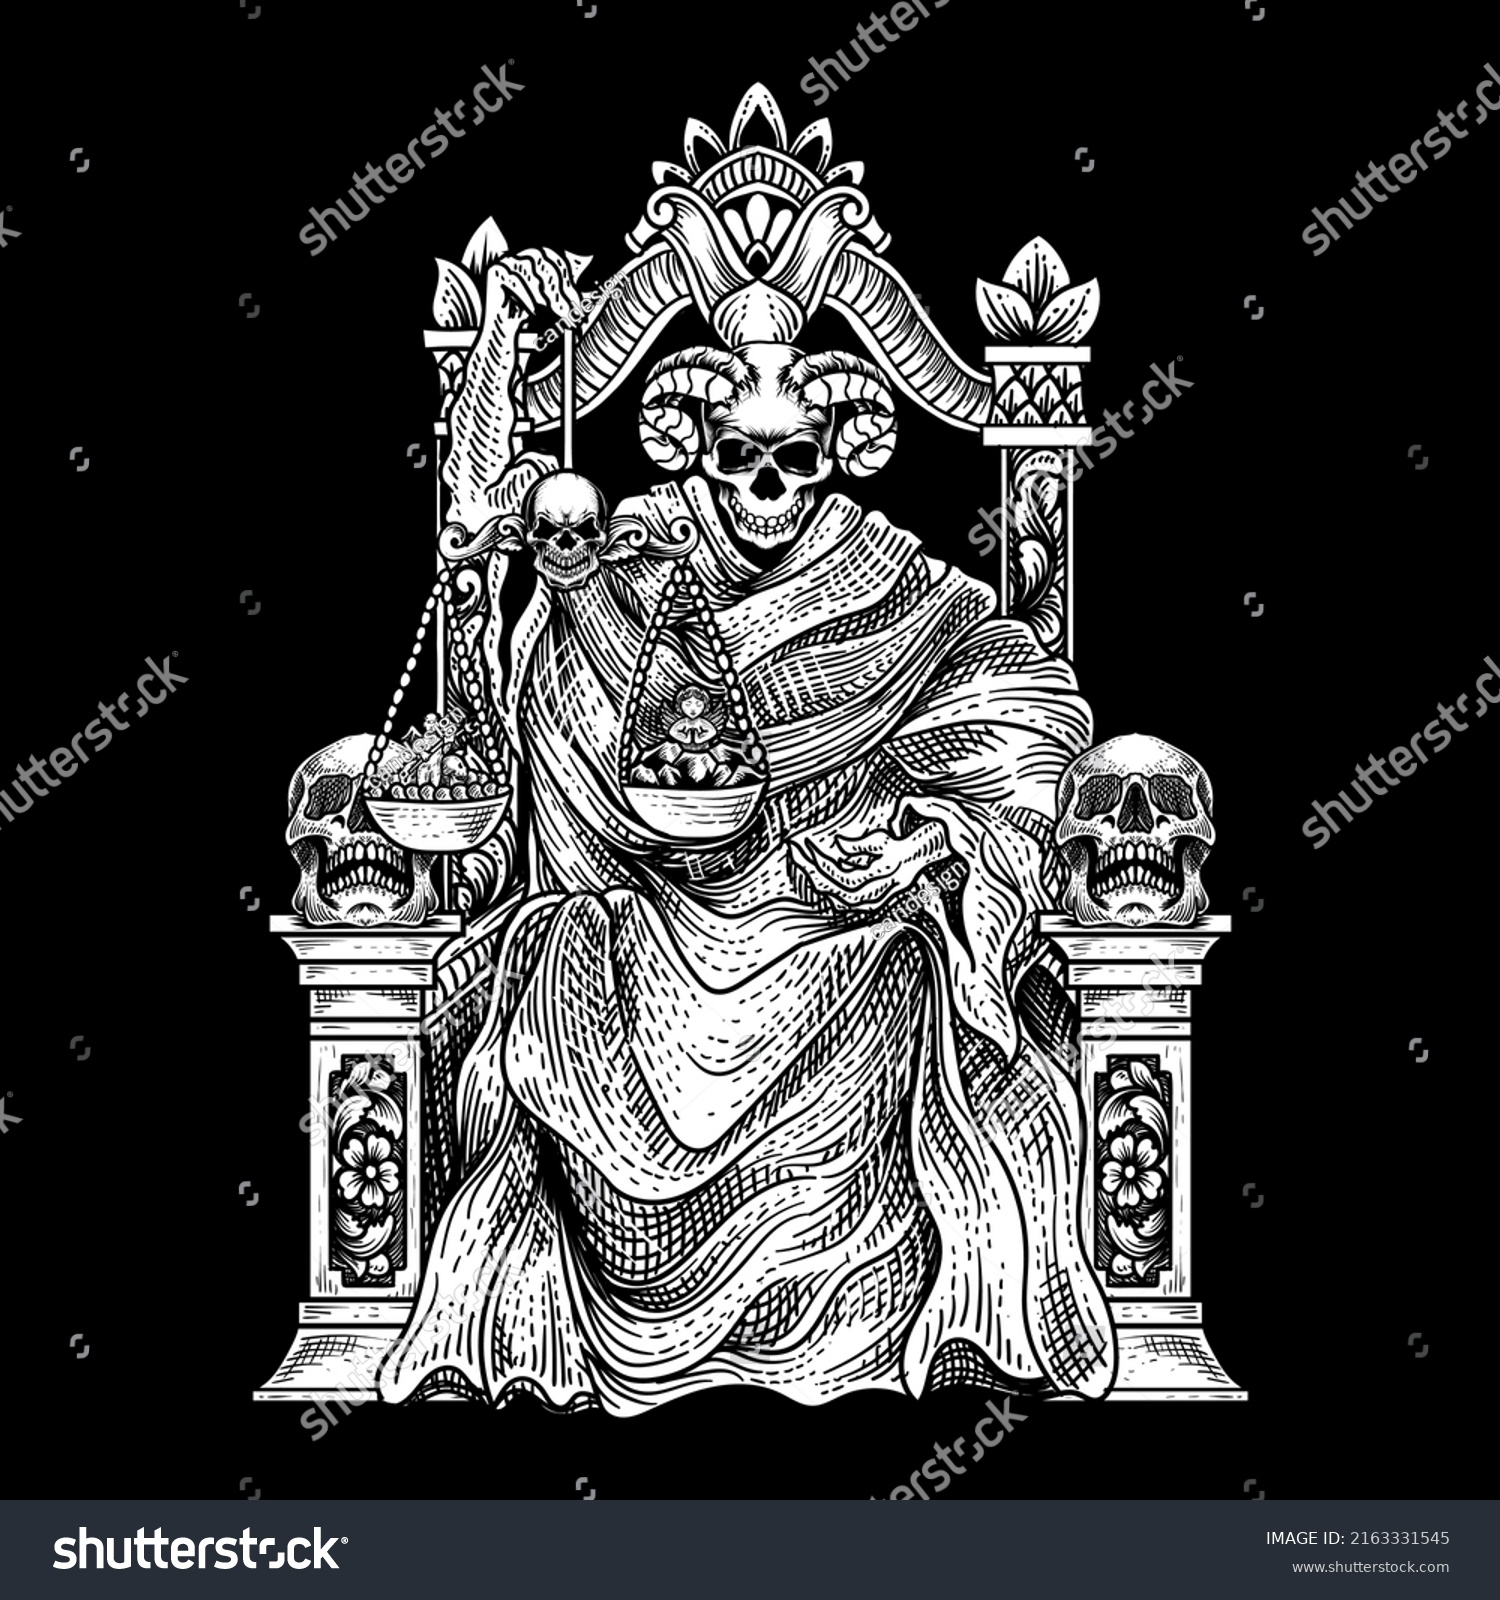 Guardian Hell Tattoo Sketch Black White Stock Vector (Royalty Free ...